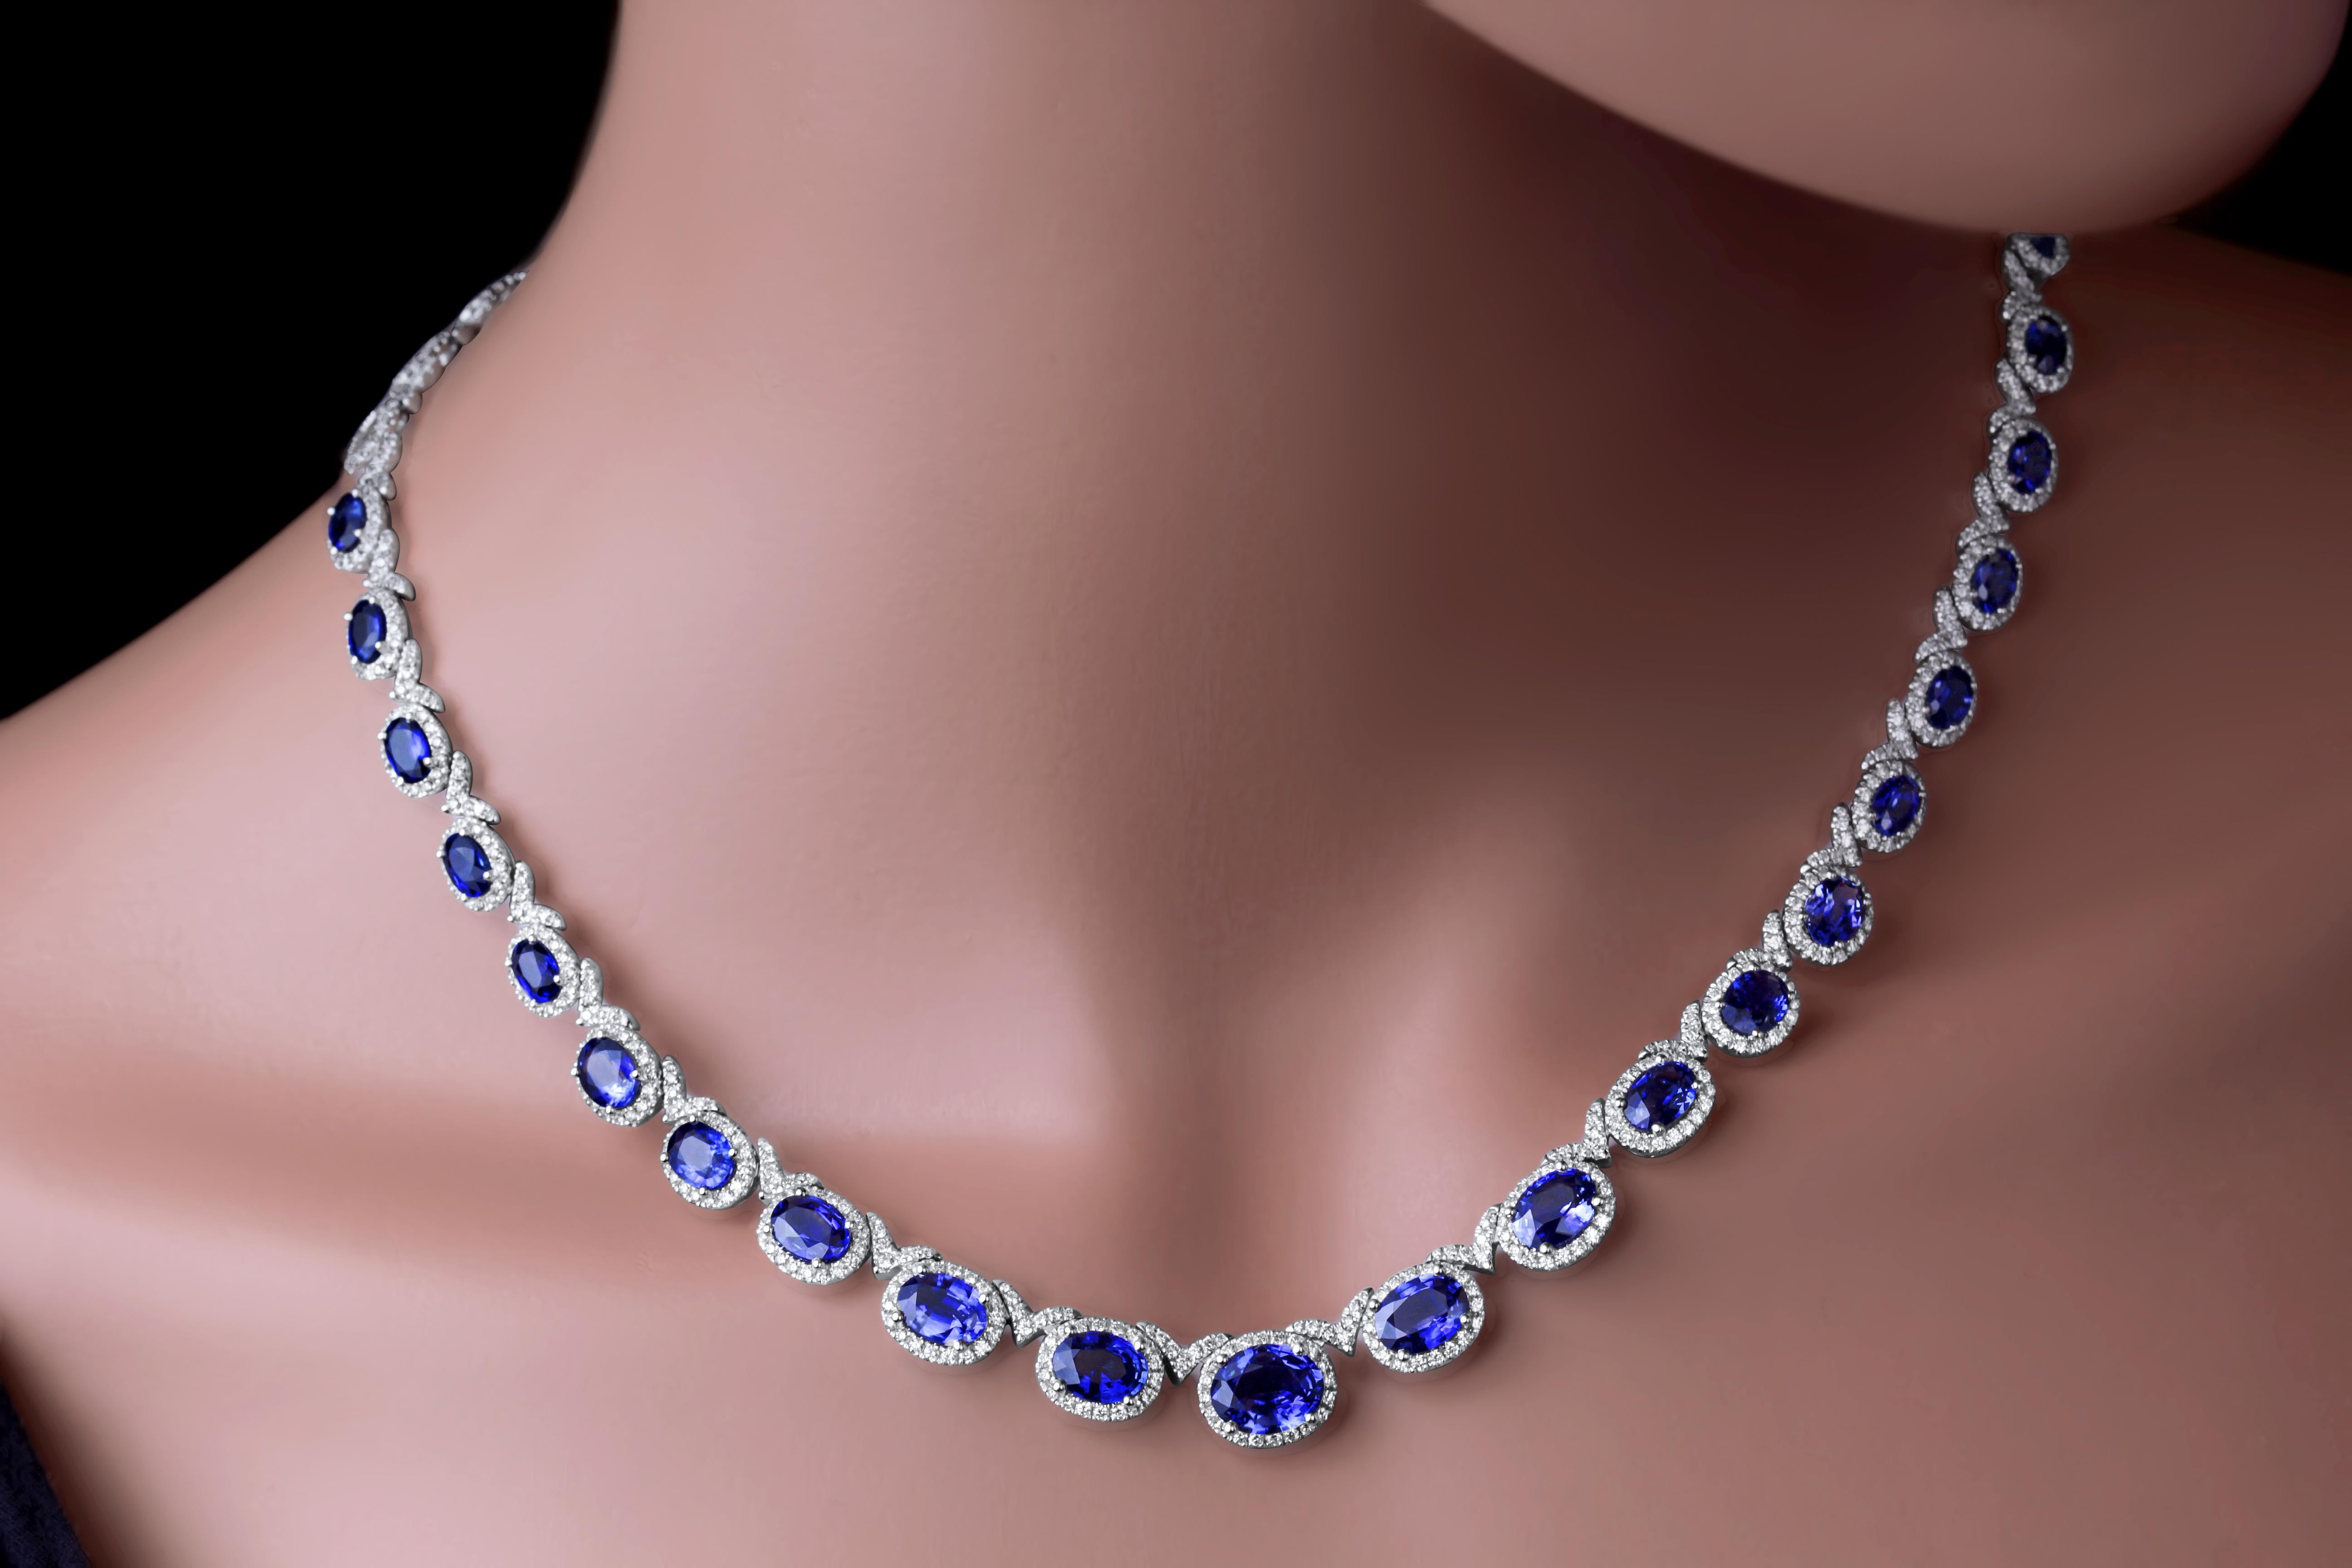 19.34 Ct Vivid Blue Oval Cut Sapphire and 5.65 Ct Diamond Necklace in 18W ref71 In New Condition For Sale In New York, NY